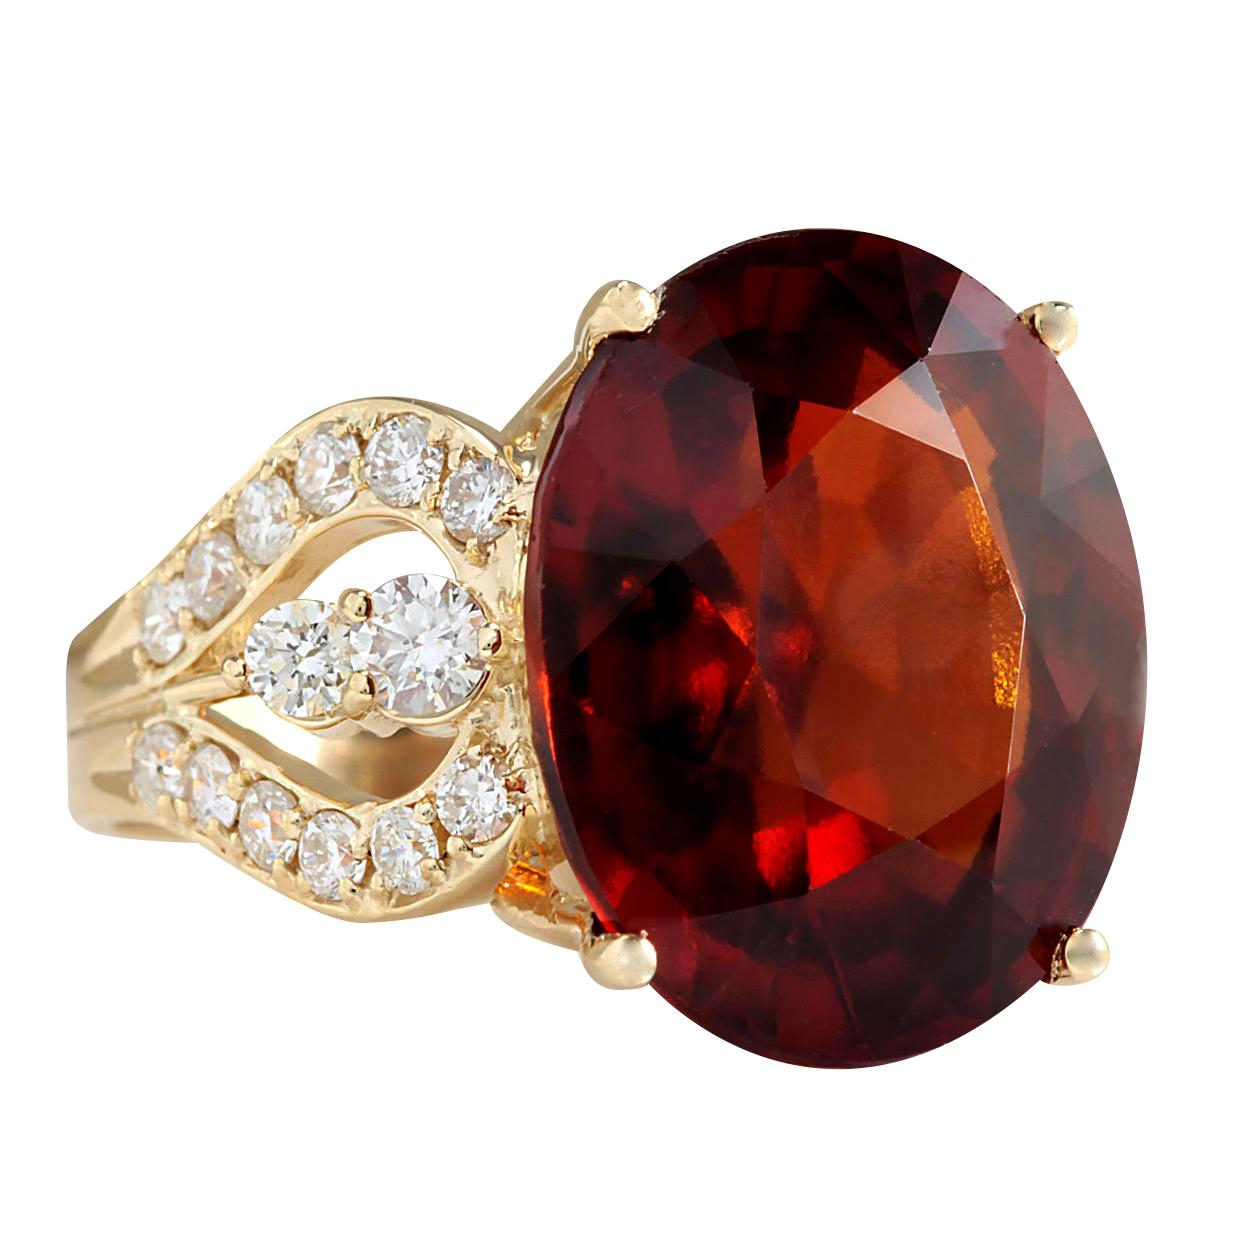 Stamped: 18K Yellow Gold<br />Total Ring Weight: 11.2 Grams<br />Ring Length: N/A<br />Ring Width: N/A<br />Gemstone Weight: Total  Hessonite Garnet Weight is 18.48 Carat (Measures: 18.05x14.67 mm)<br />Color: Red<br />Diamond Weight: Total  Diamond